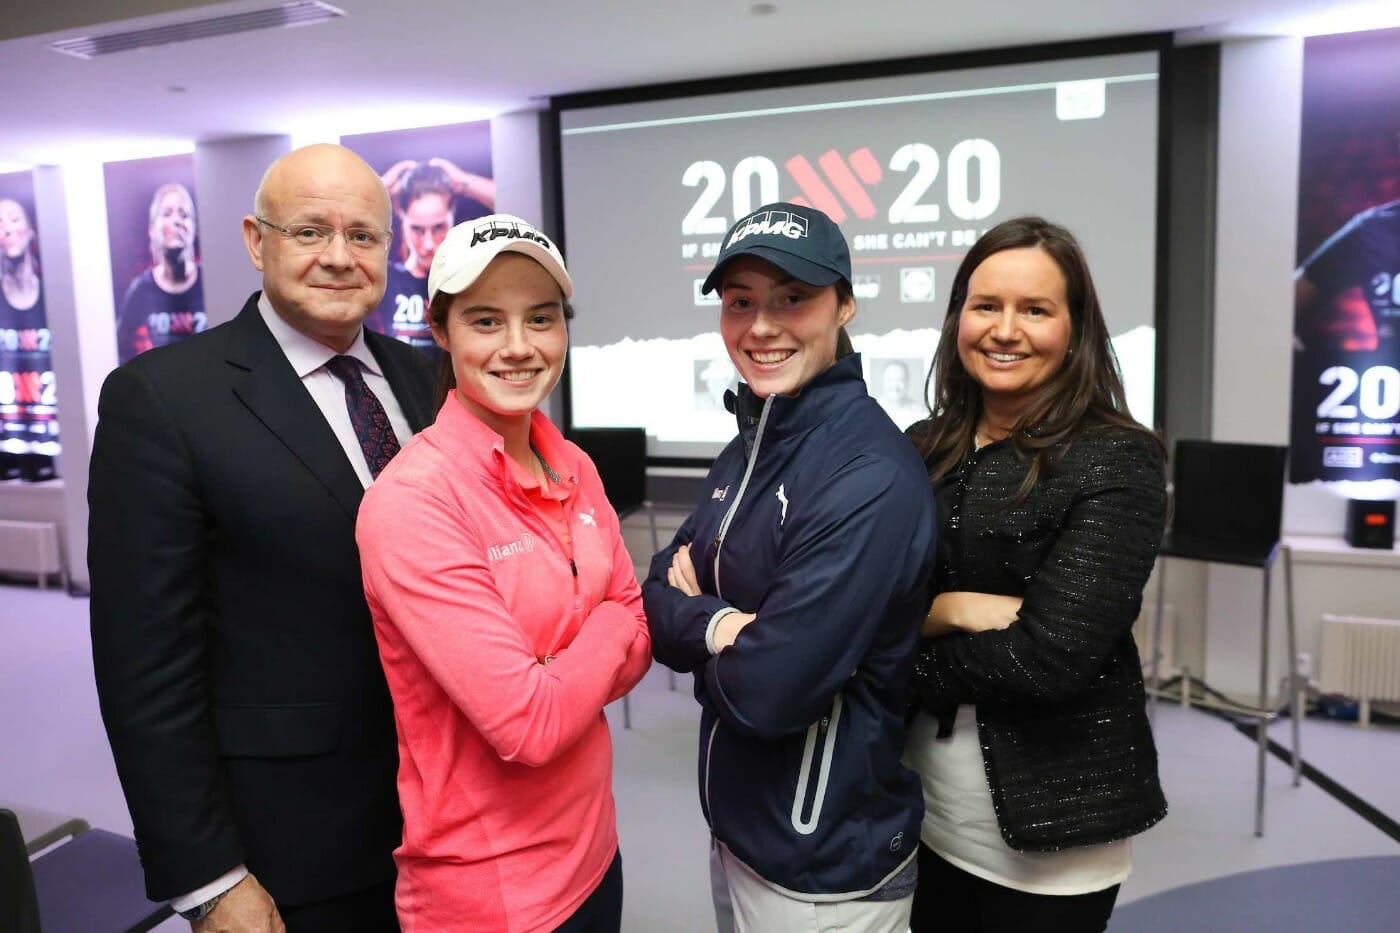 20×20 vision aiming to plug gender inequality within sport